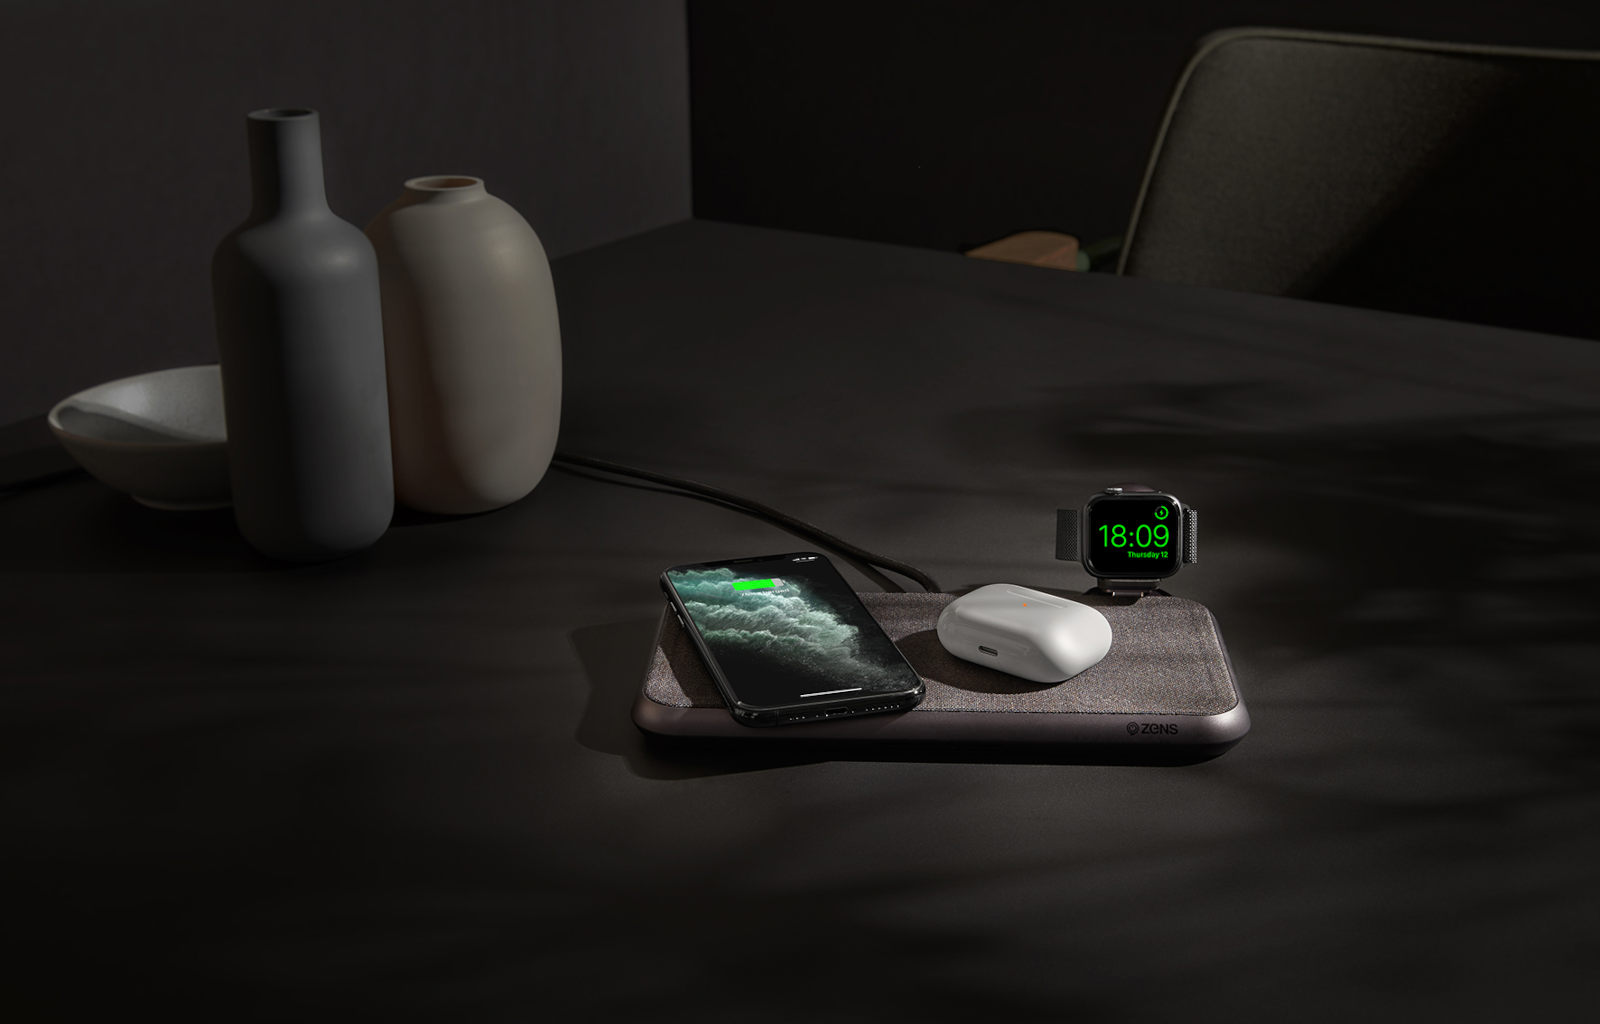 iPhone, airpods and apple watch charger on liberty wireless charger